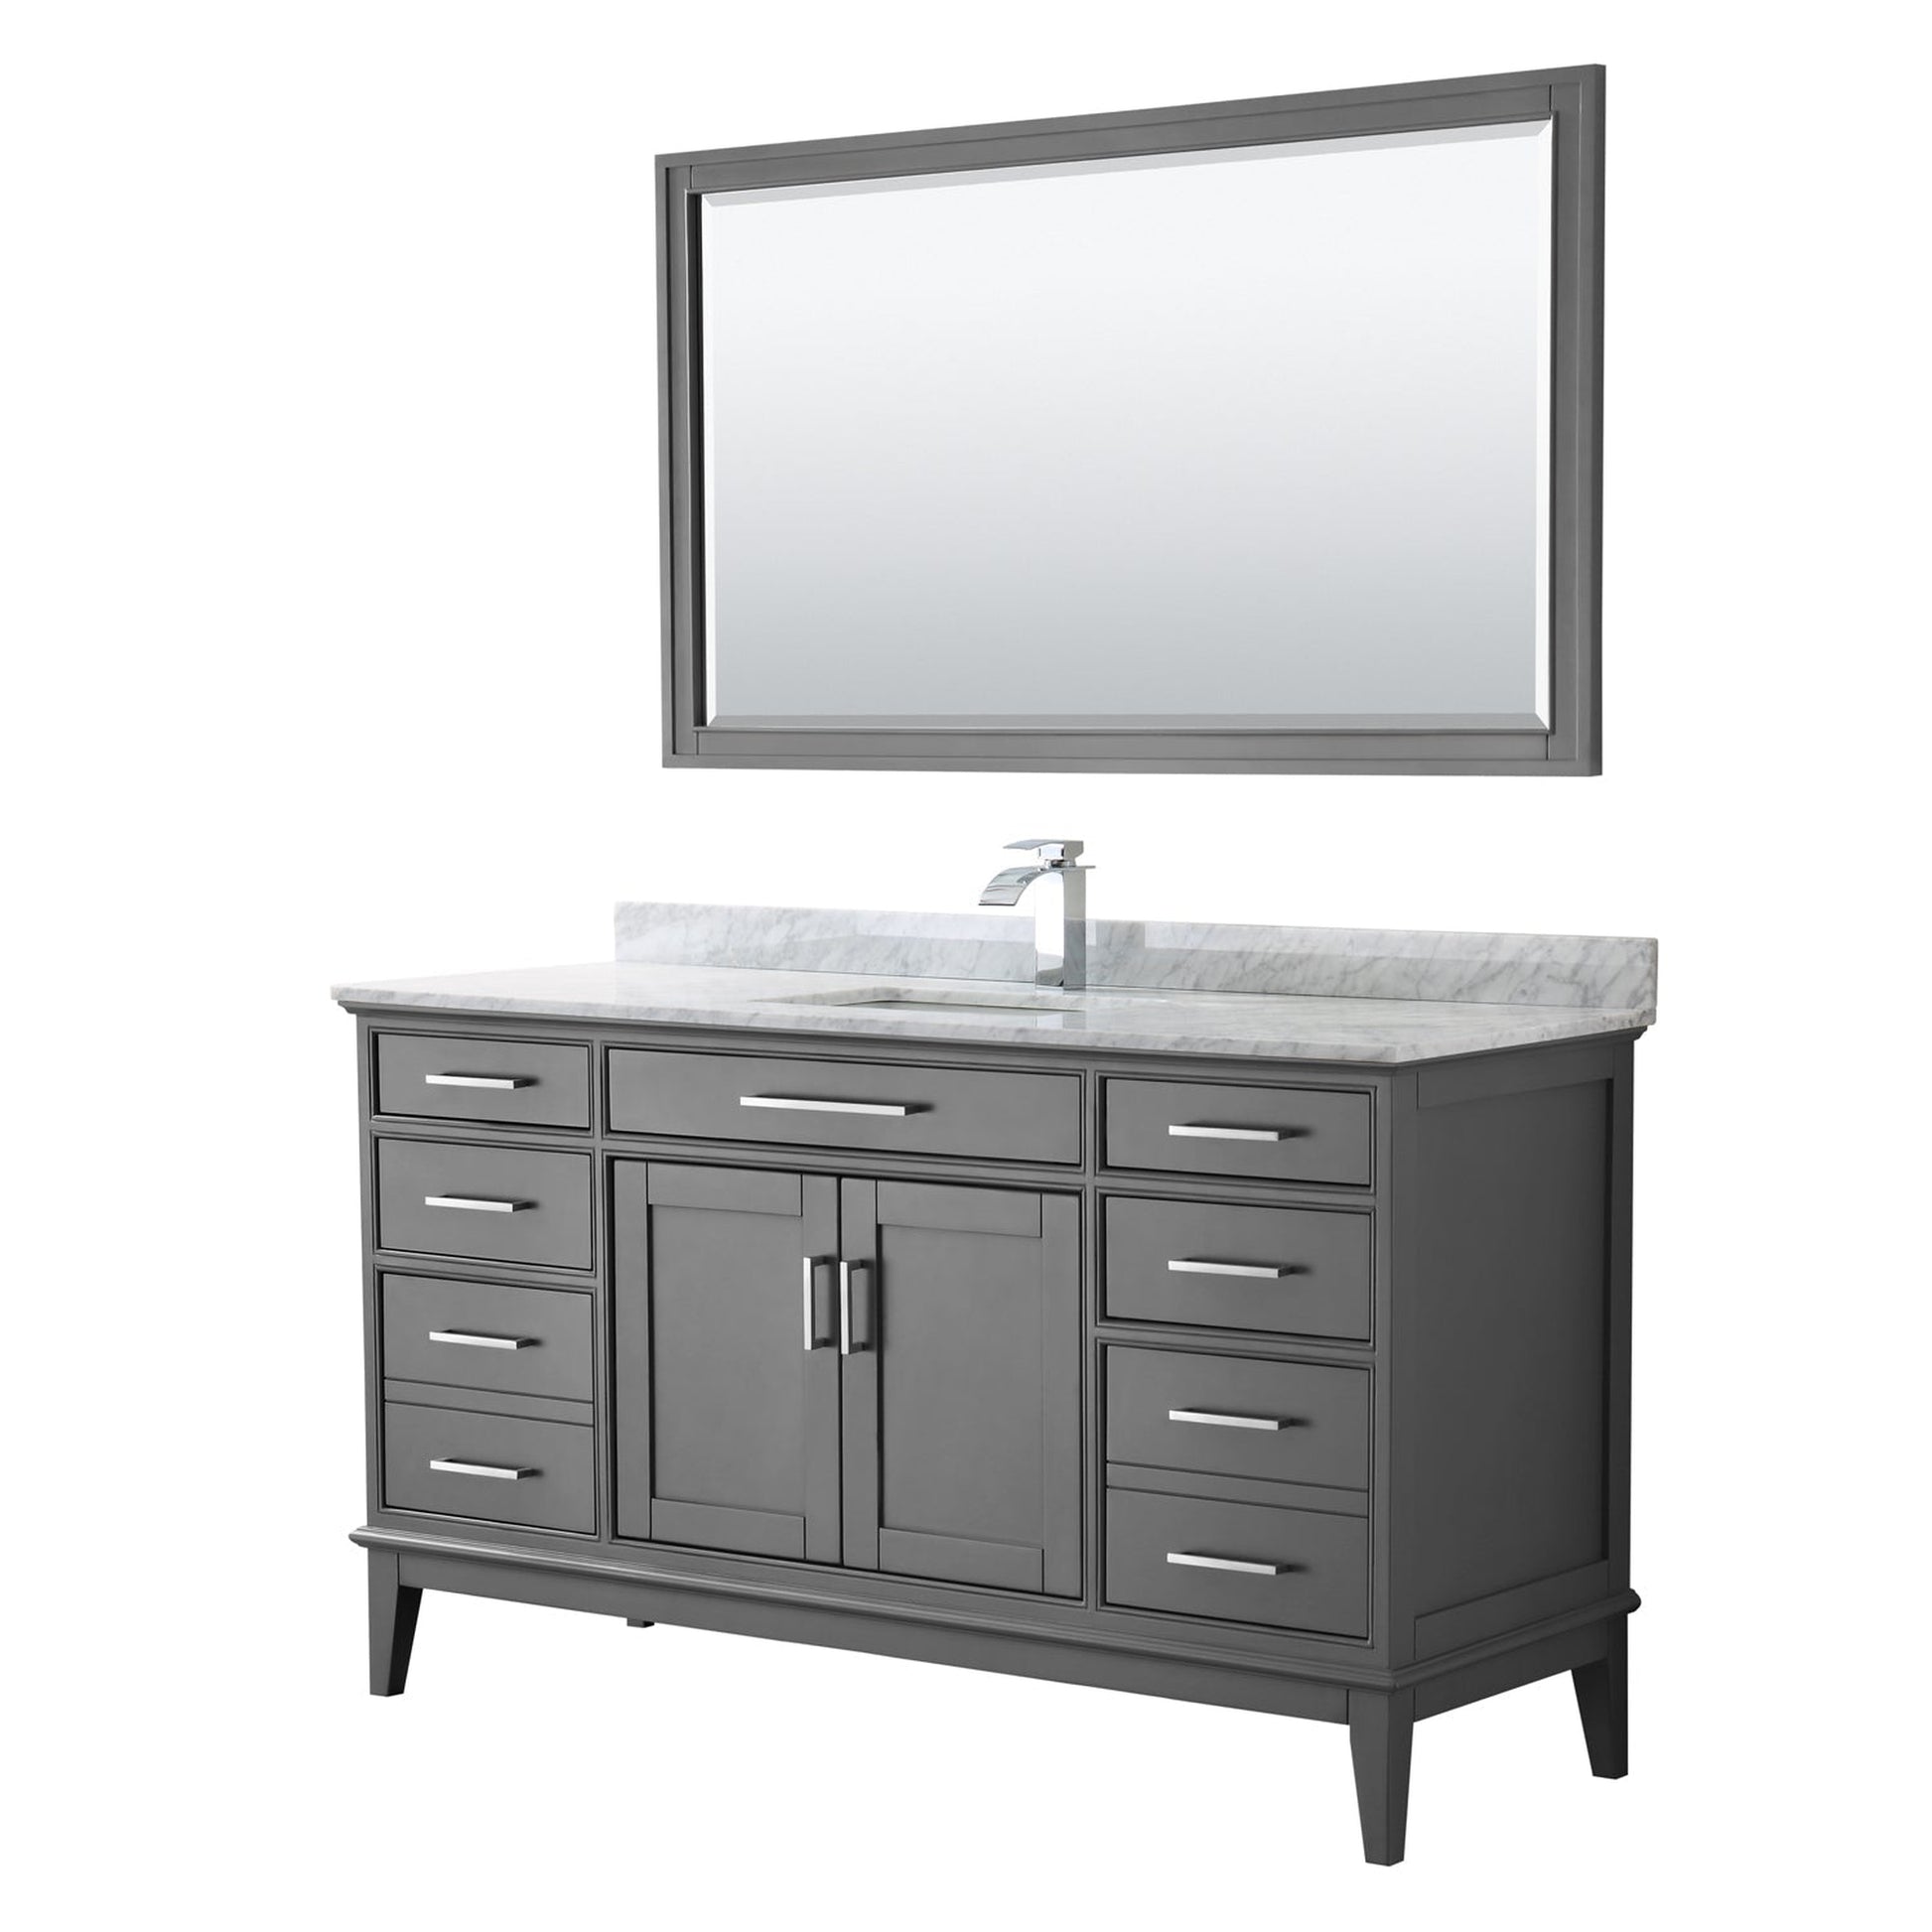 Wyndham Collection Margate 60" Single Bathroom Dark Gray Vanity With White Carrara Marble Countertop, Undermount Square Sink And 56" Mirror